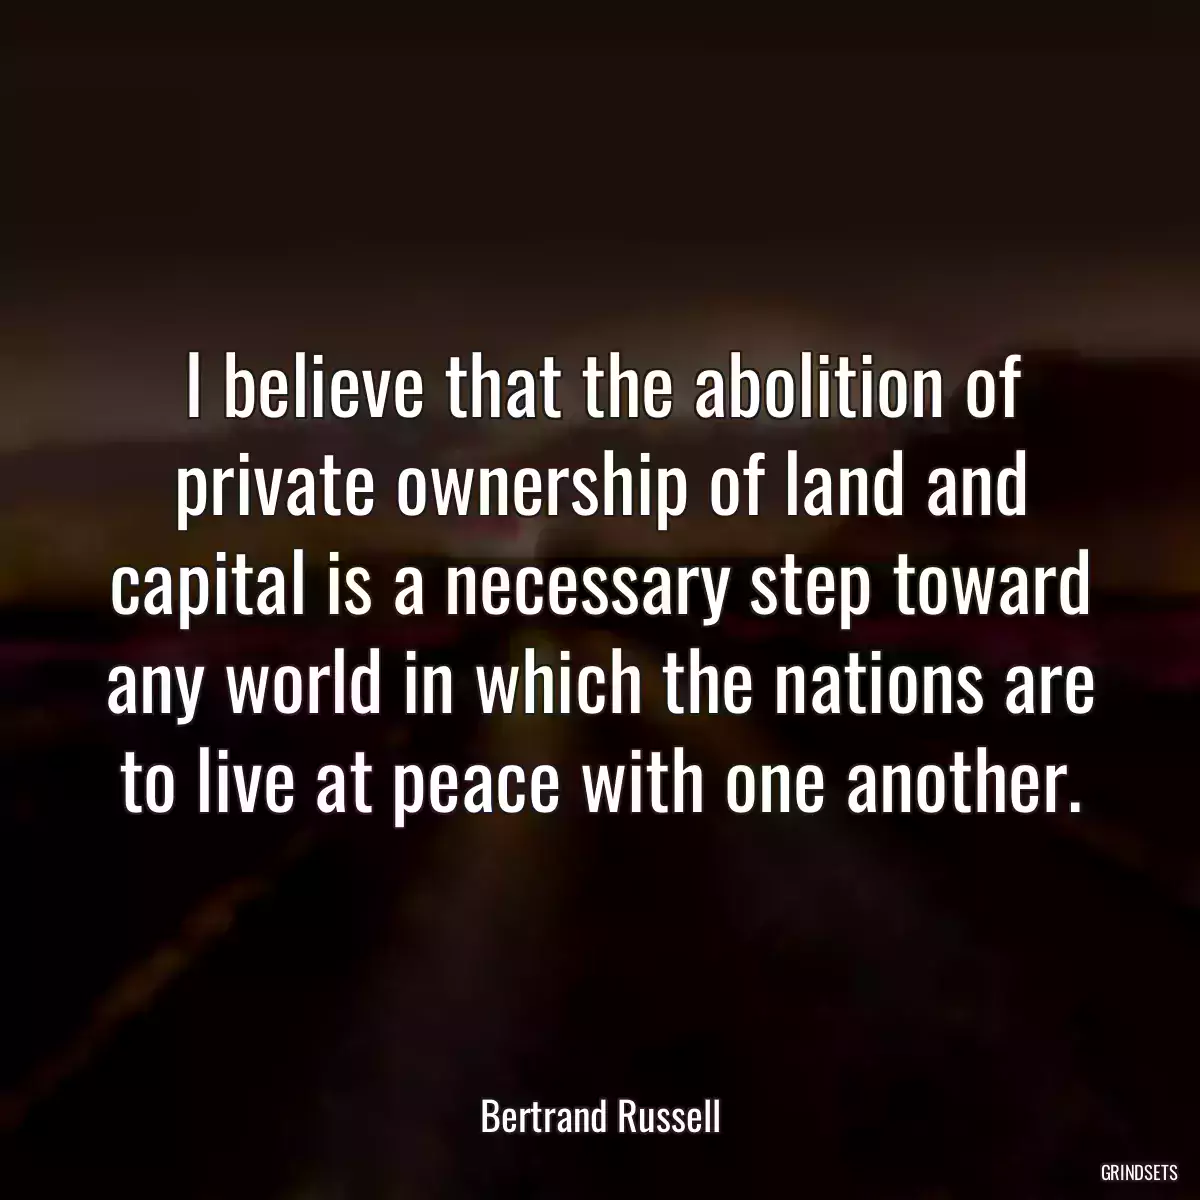 I believe that the abolition of private ownership of land and capital is a necessary step toward any world in which the nations are to live at peace with one another.